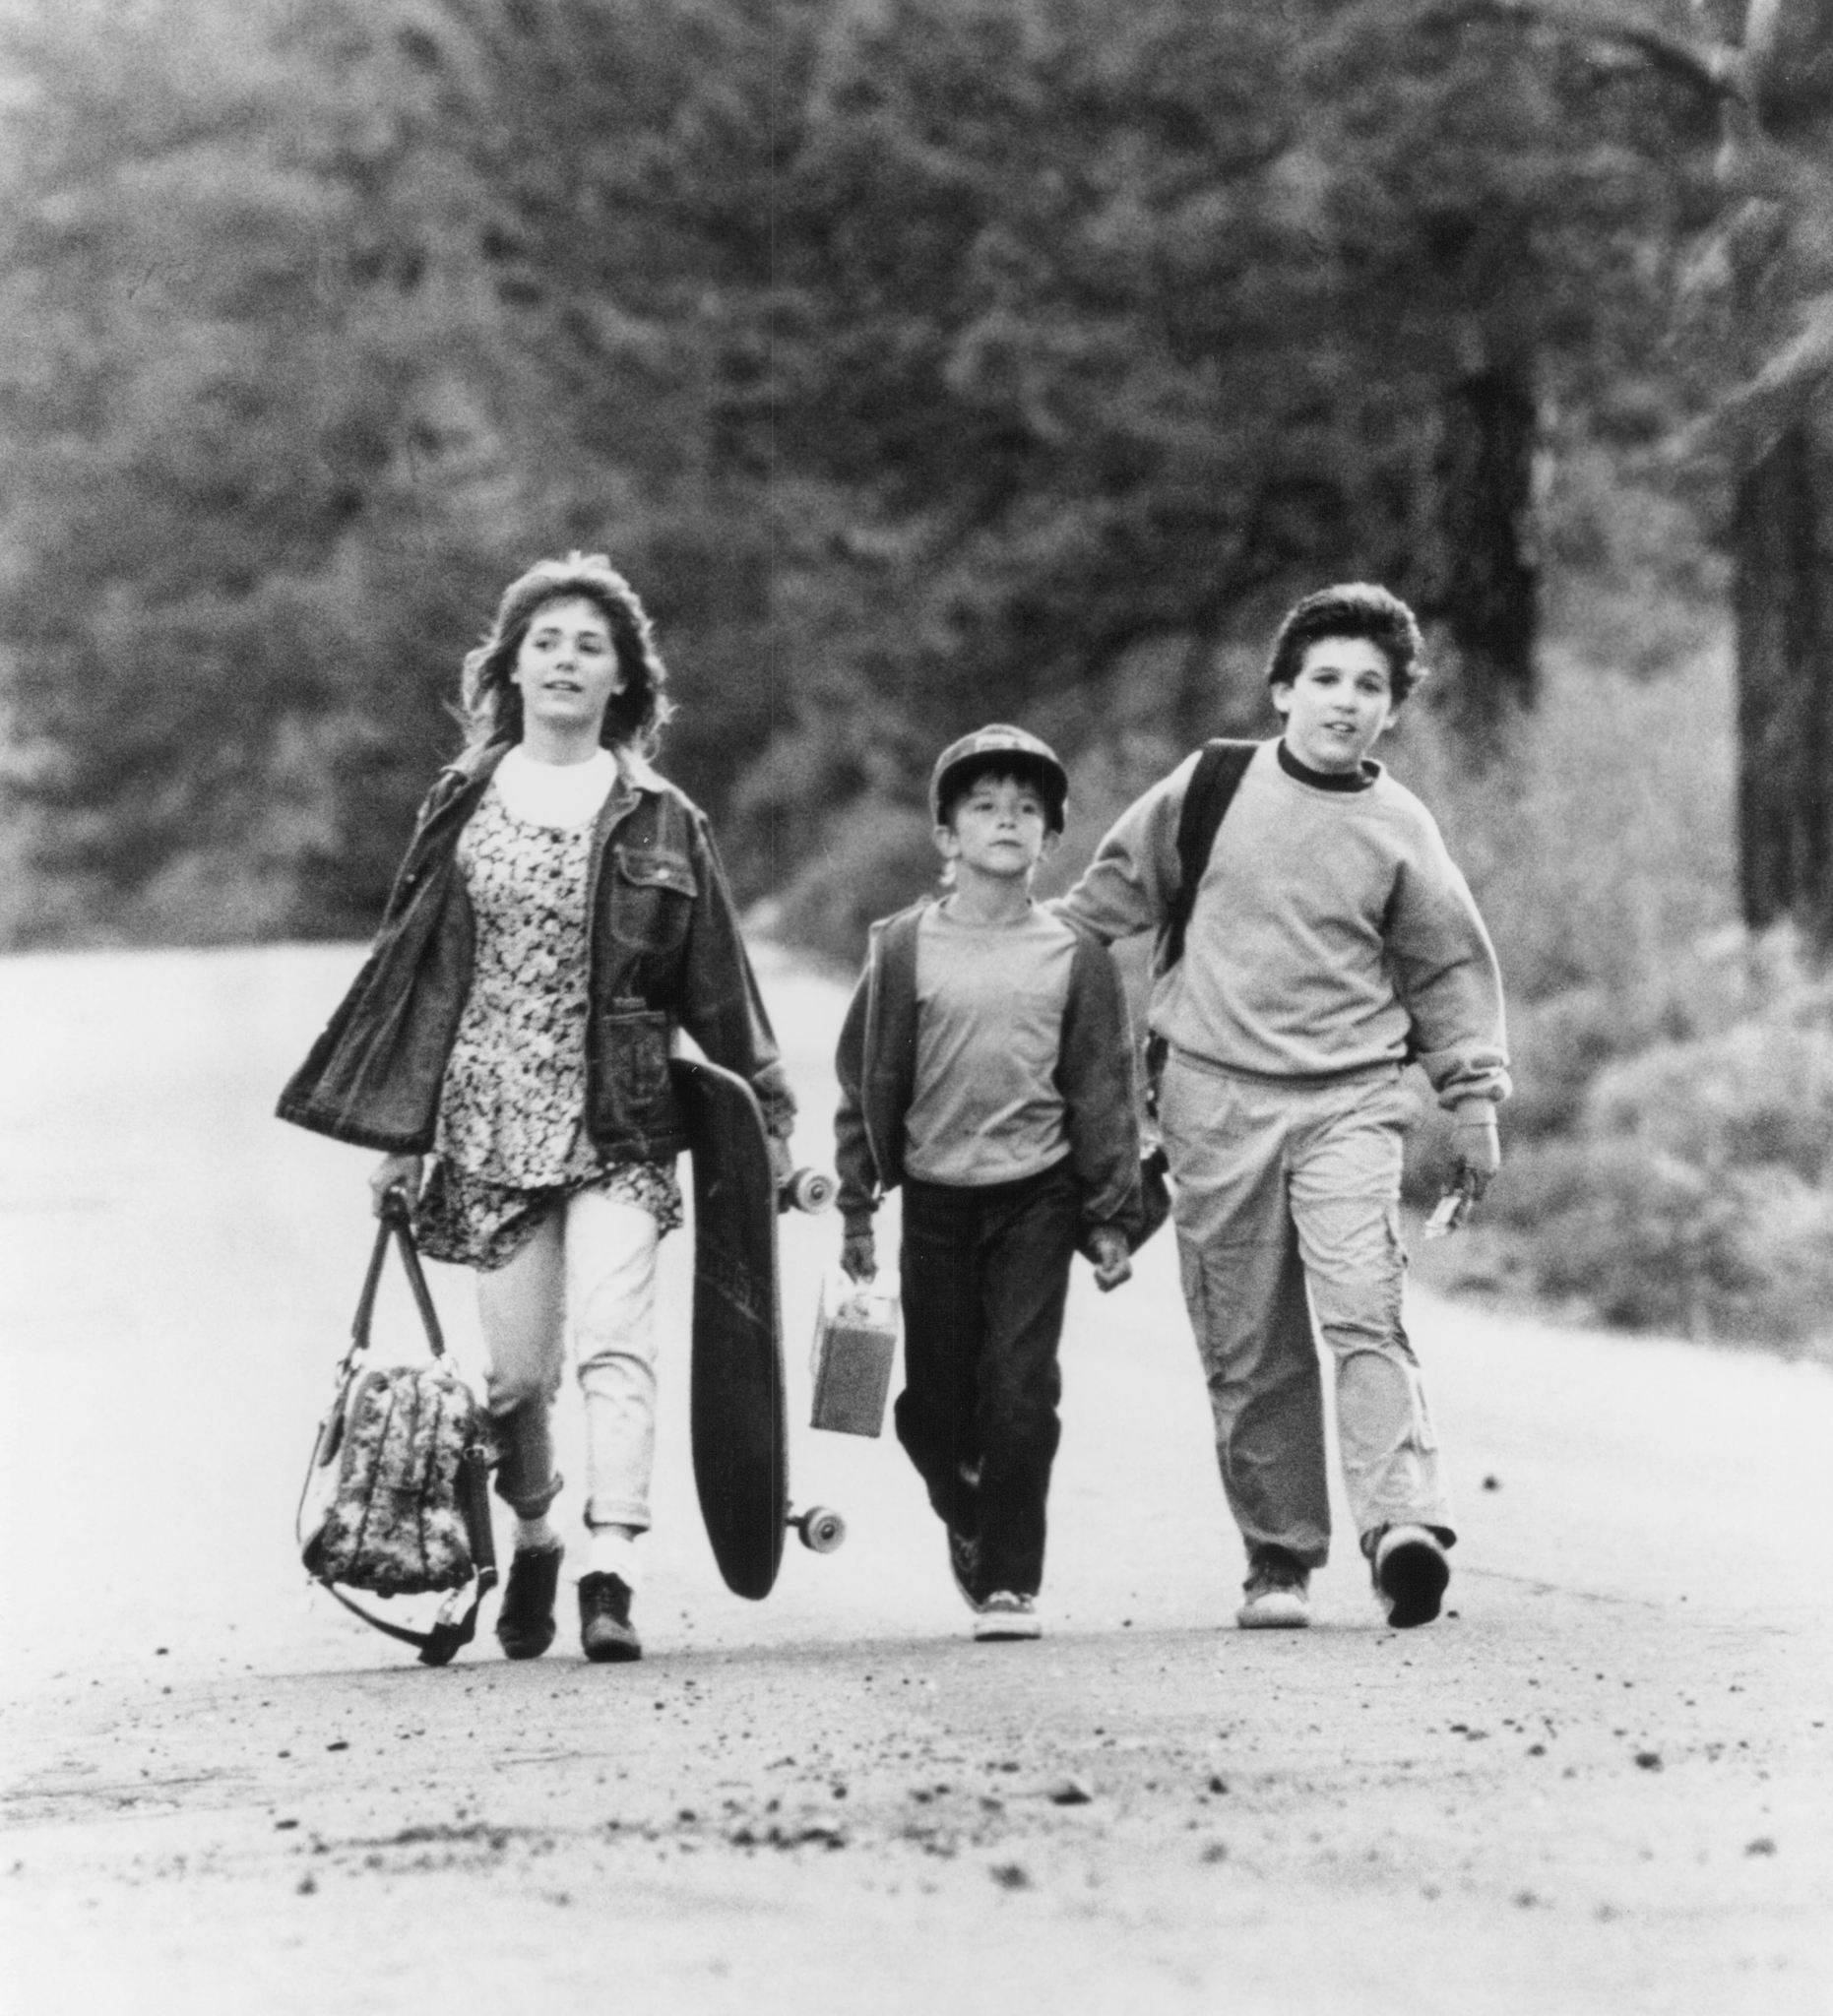 Still of Fred Savage, Luke Edwards and Jenny Lewis in The Wizard (1989)